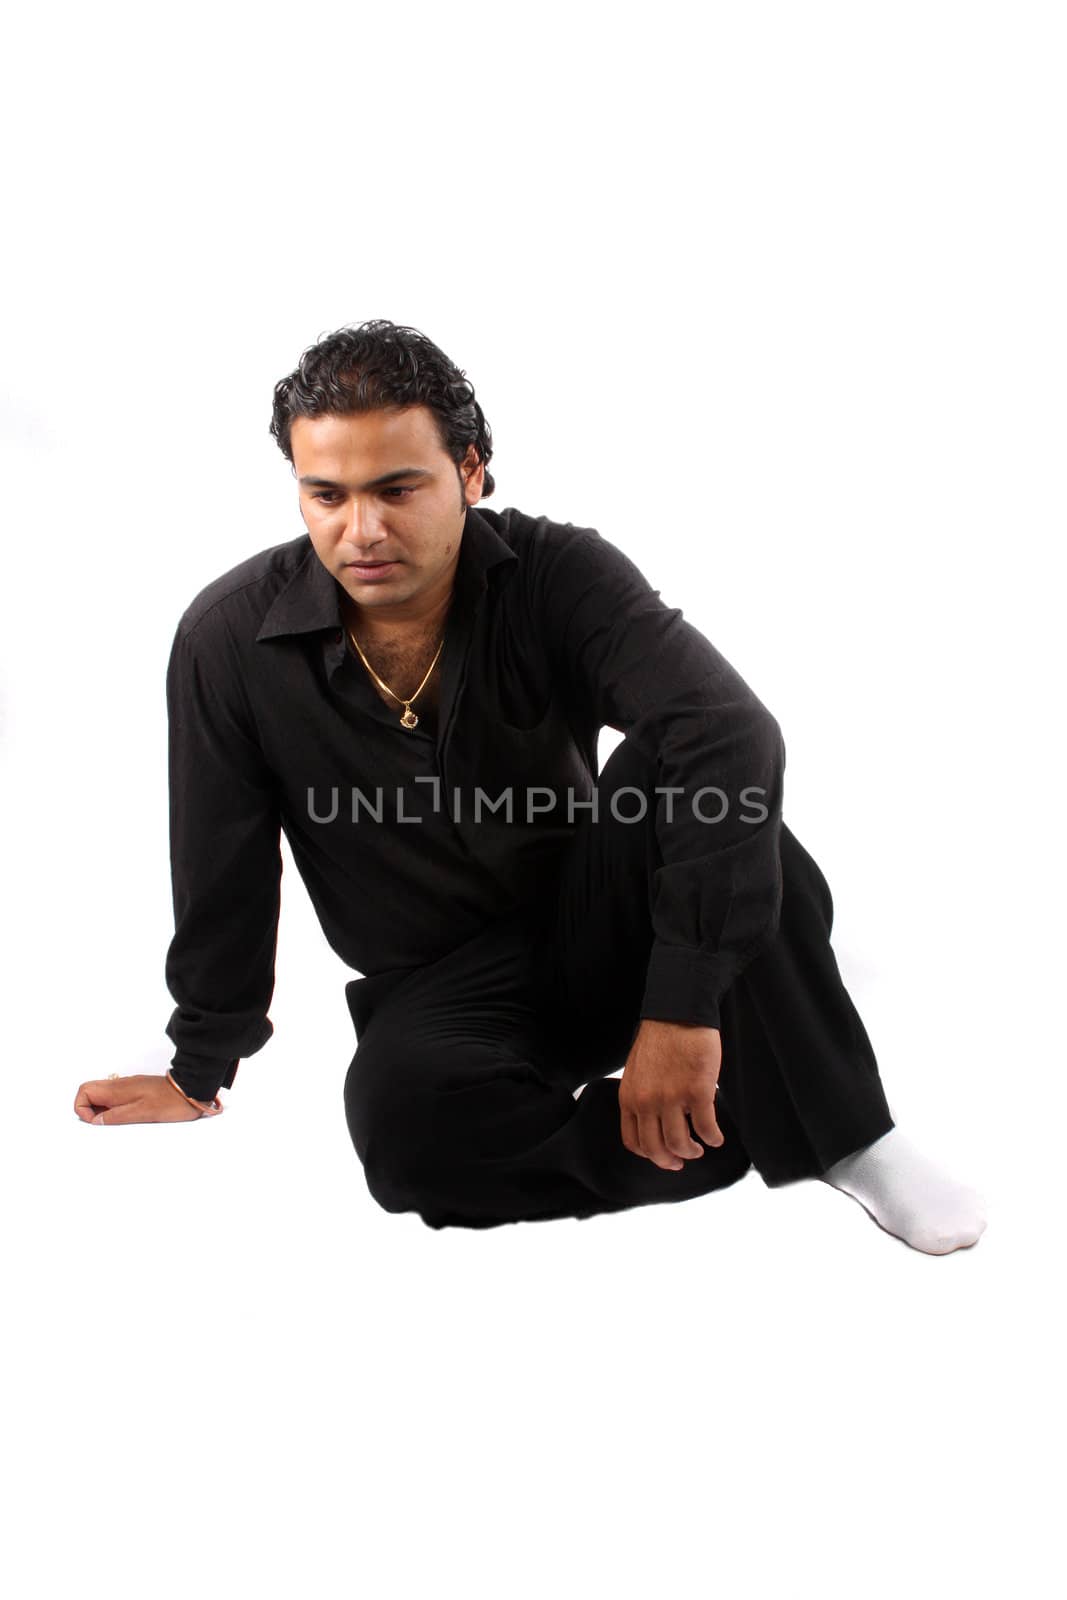 A depressed Indian guy sitting on the floor, on white studio background.